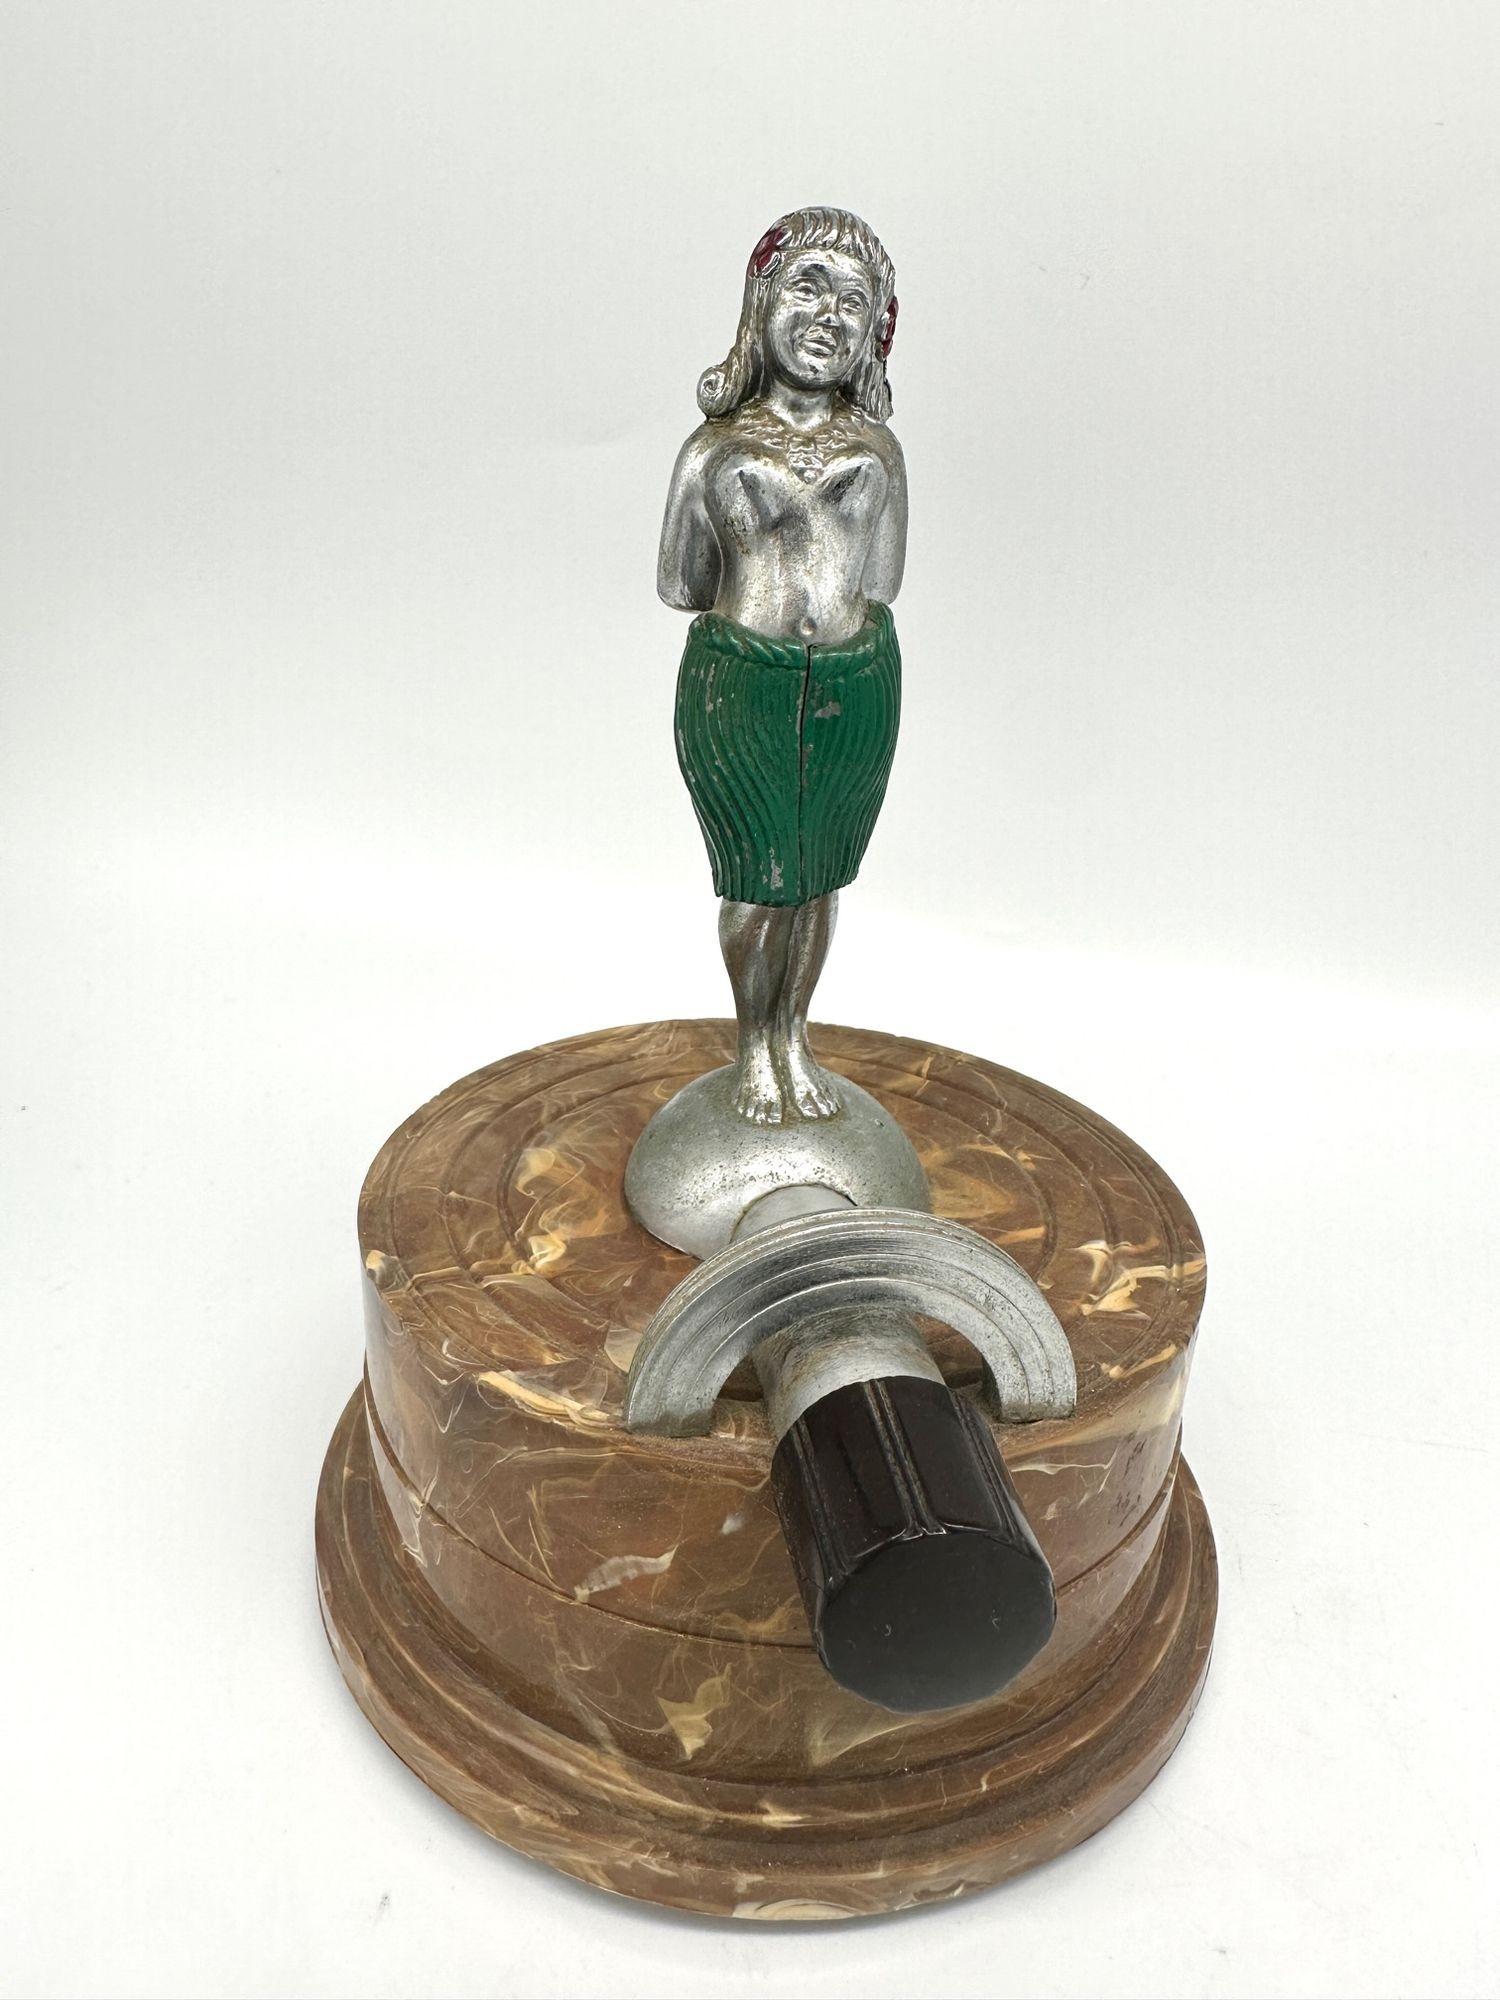 This vintage table lighter by the company ARROW is an exceedingly rare find: a tastefully nude Hula Girl model crafted from chromed metal, featuring a Bakelite base. Within the base lies an innovative silent flame lighter, showcasing early